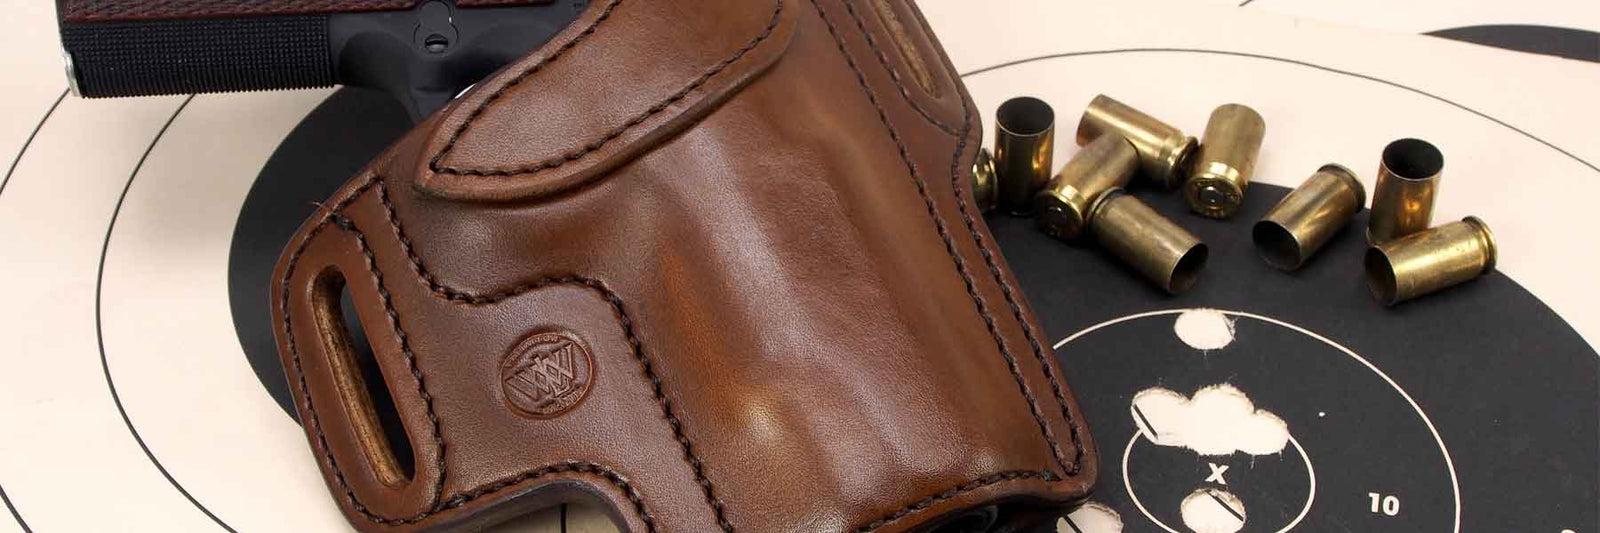 Semi-Automatic Leather Holster(OWB) Low Ride